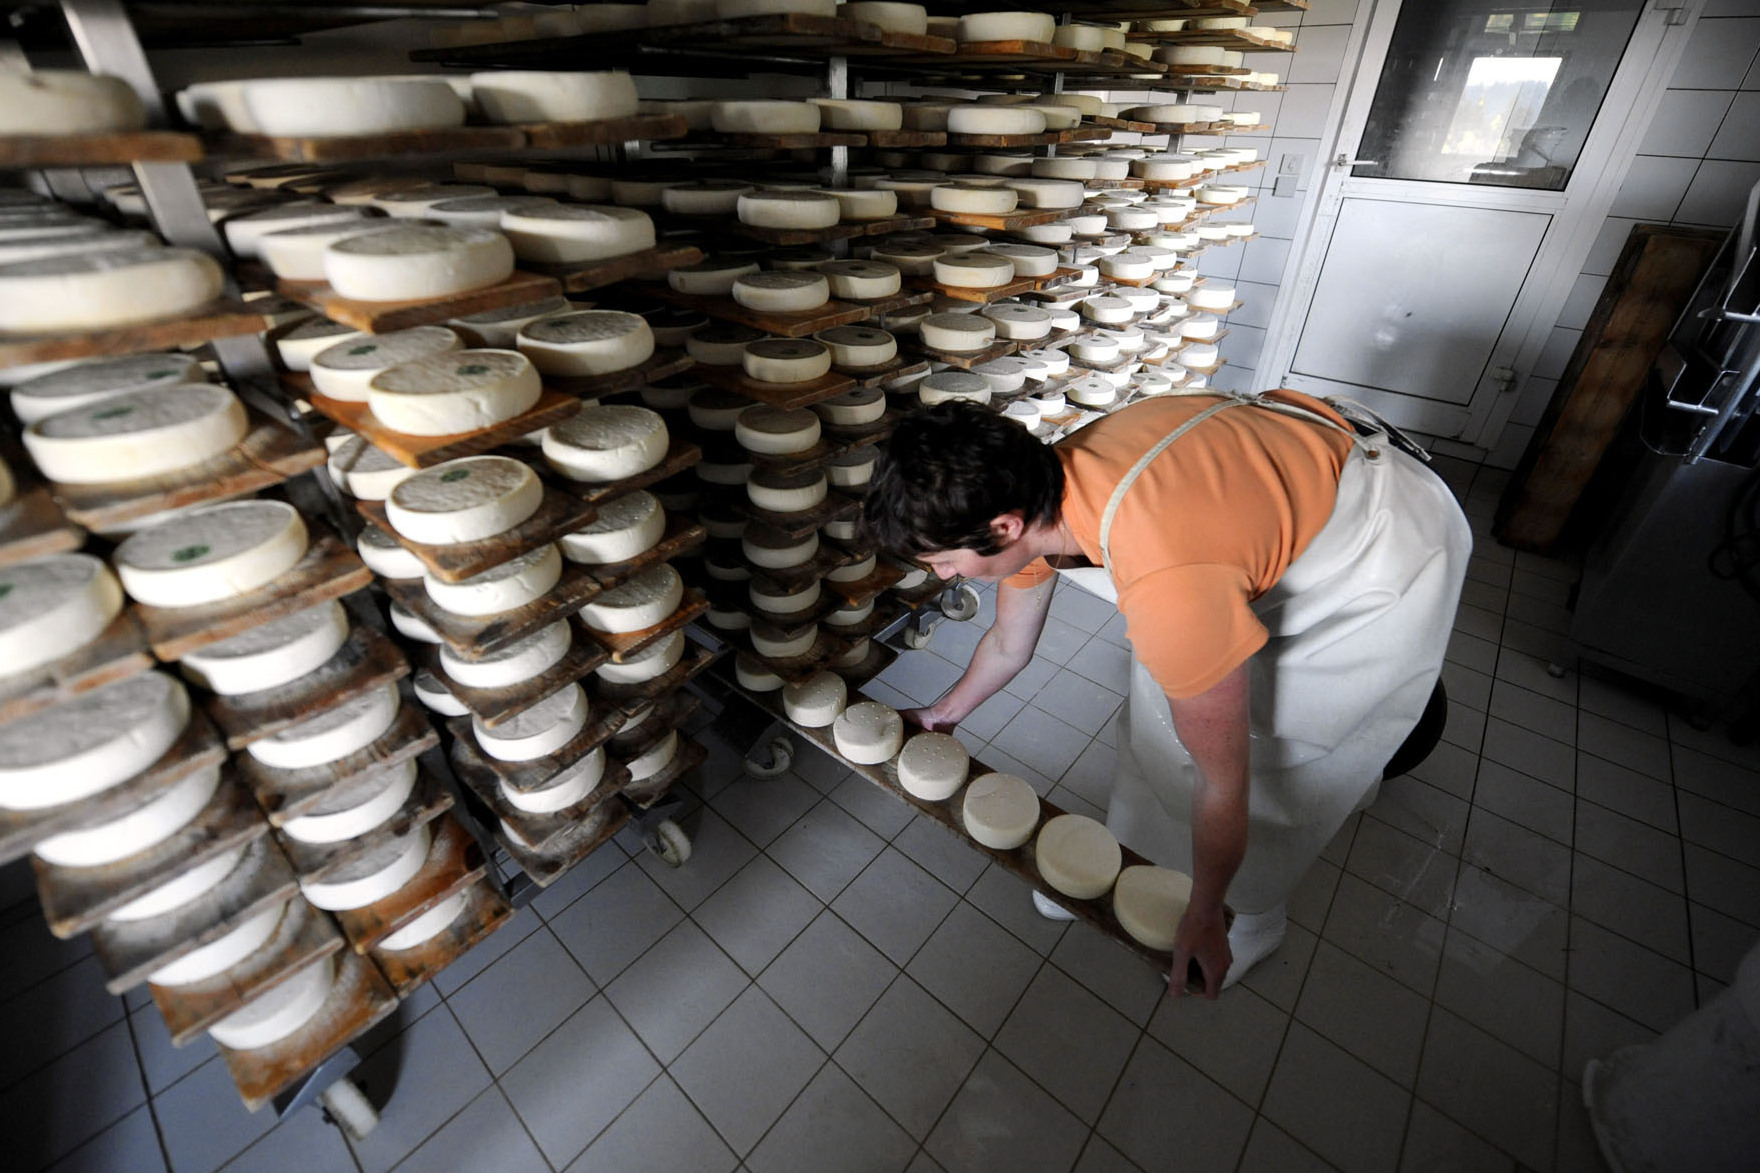 A French cheesemaker sets up wheels of Reblochon, a semi-soft cheese made from raw cow's milk, for maturing in a farm in the French Alps. Anglophone cheesemakers say translating a French government cheese manual will help them make safer raw milk cheese. Photo: Jean-Pierre Clatot/AFP/Getty Images 